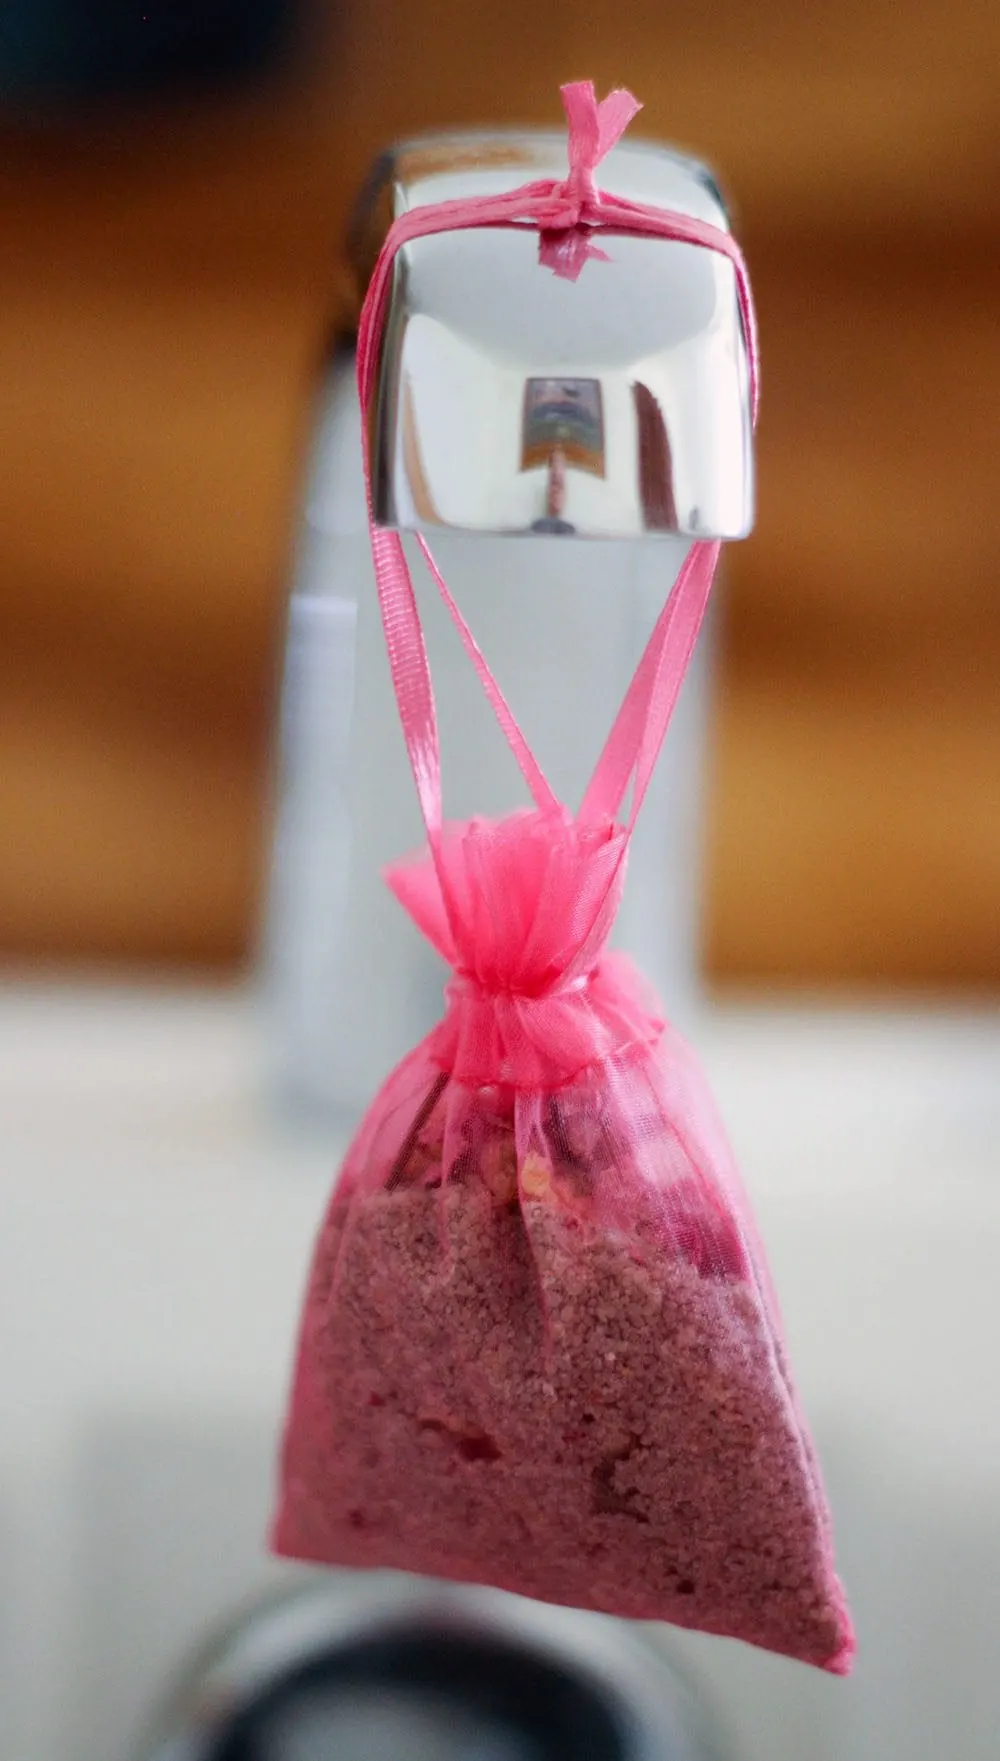 Bath salt in a bag hanging from the faucet.